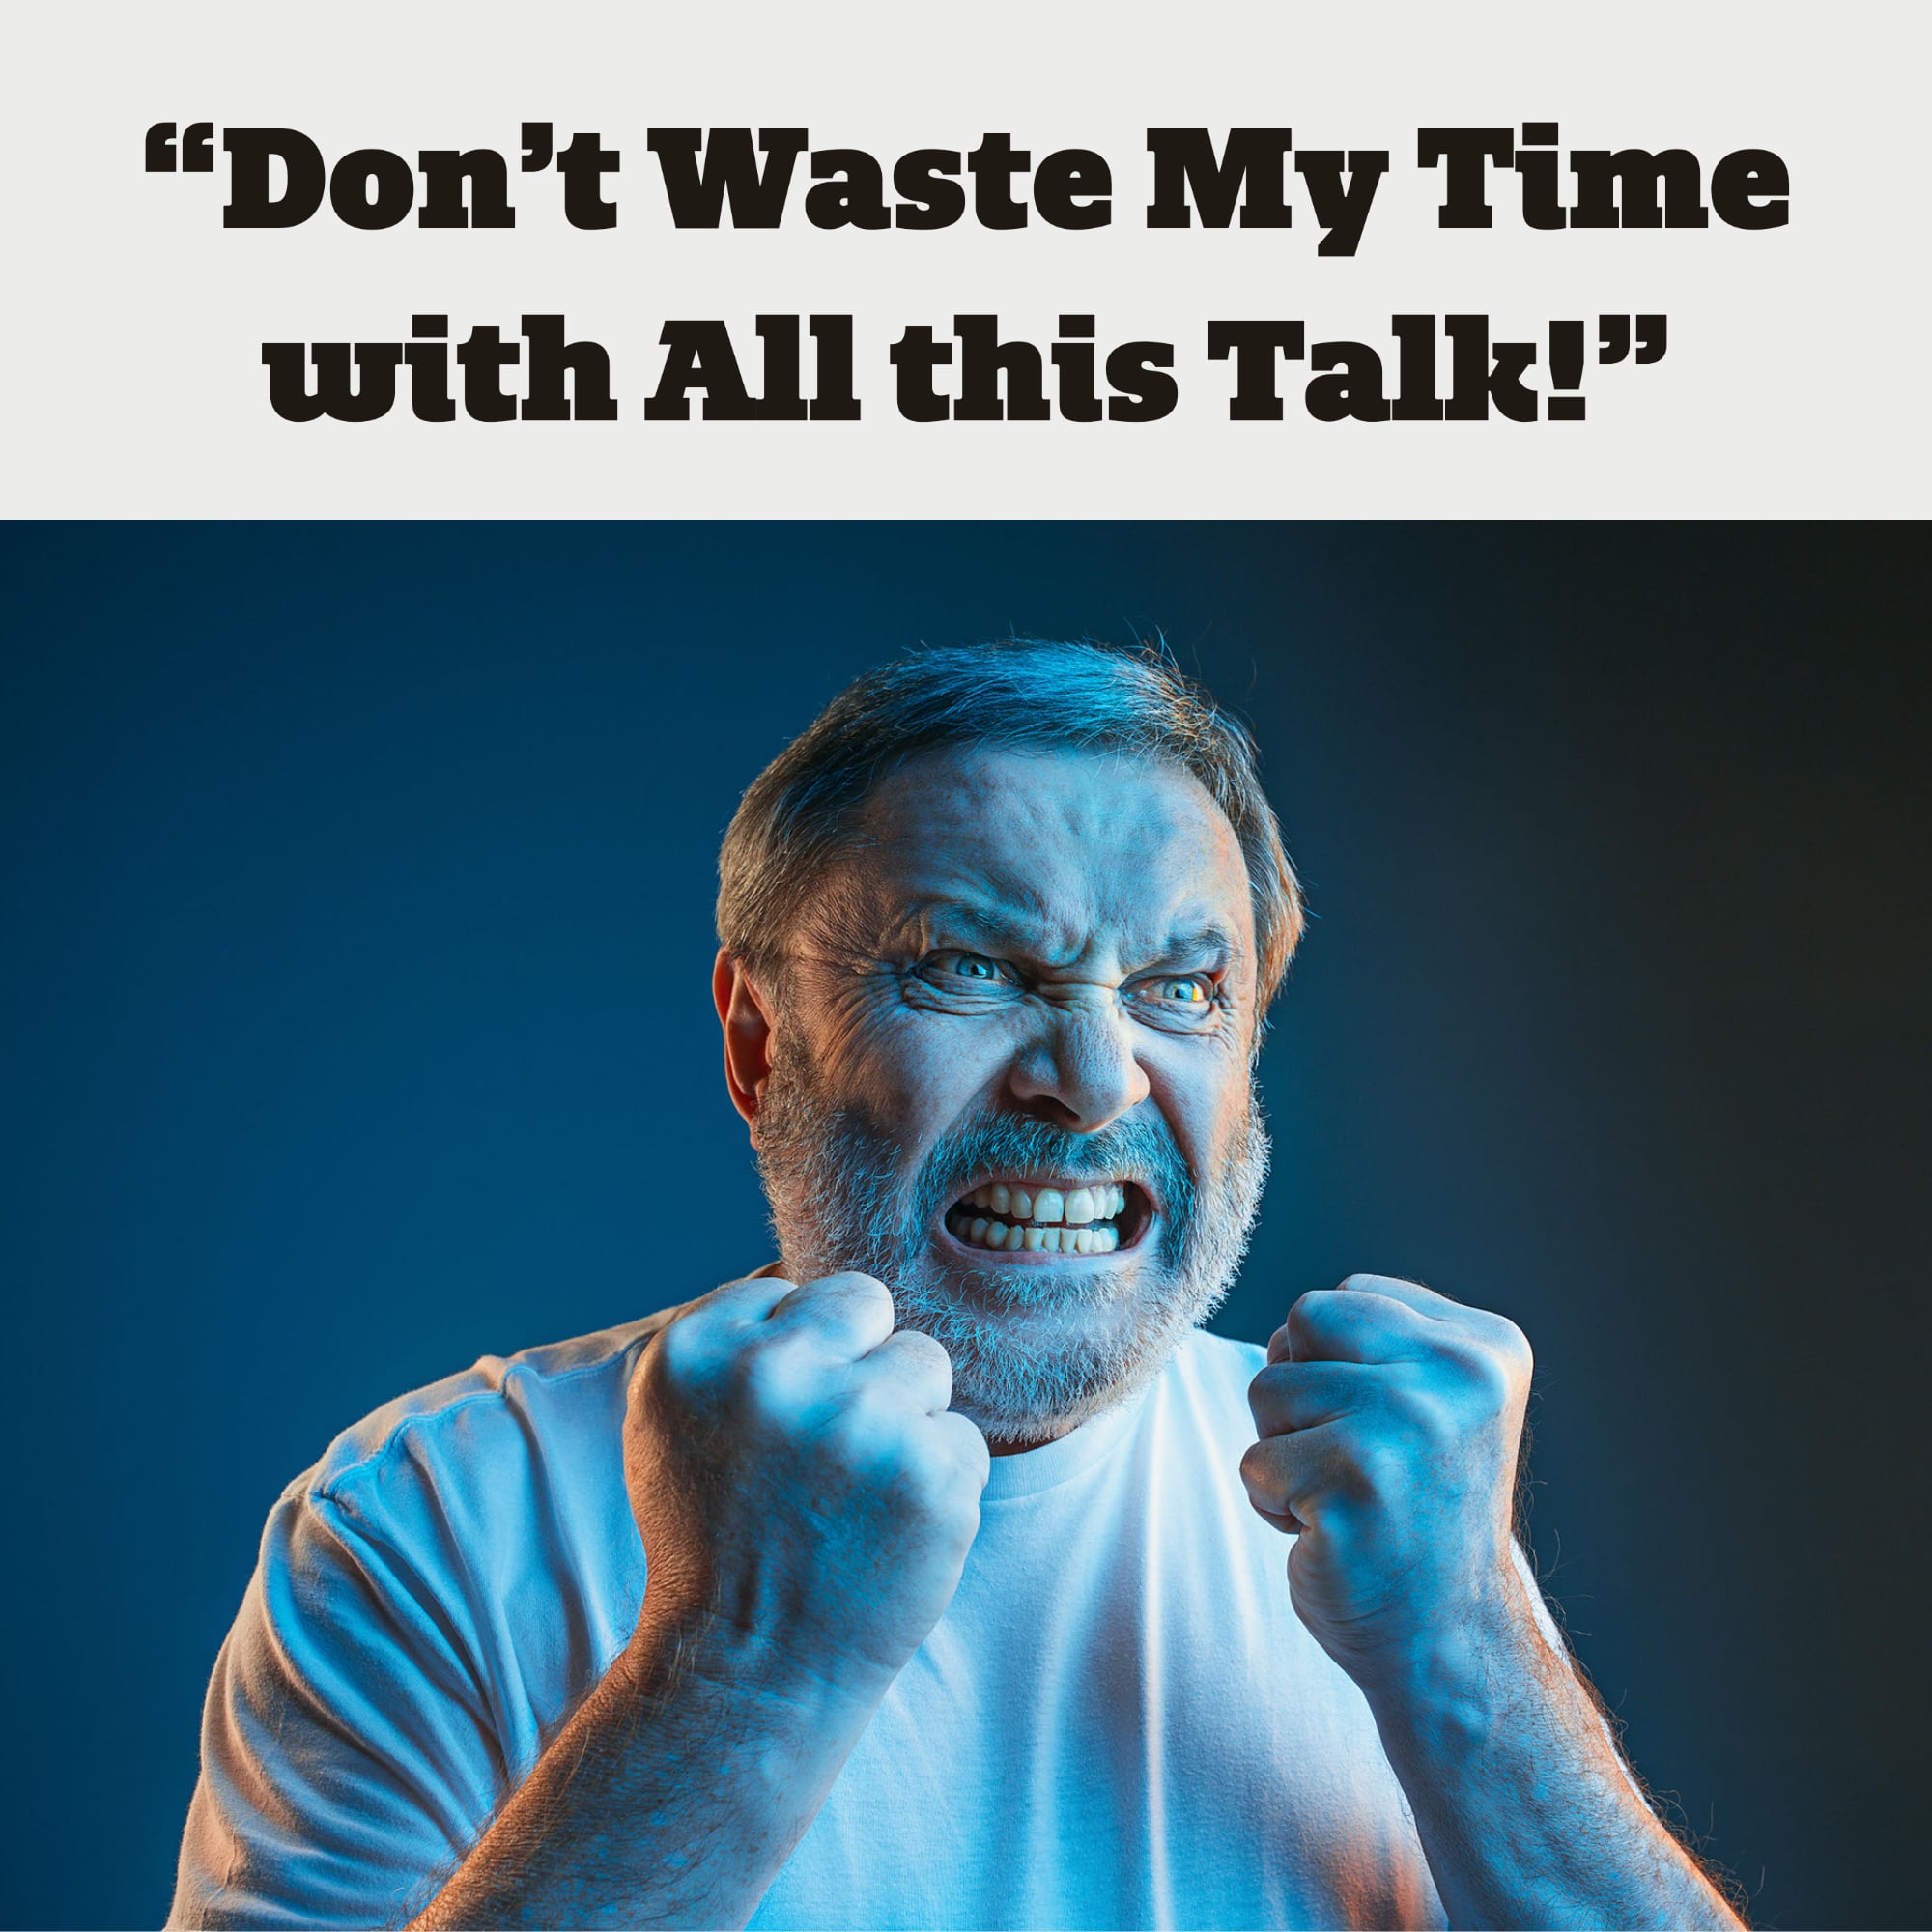 “Don’t Waste My Time with All this Talk!”